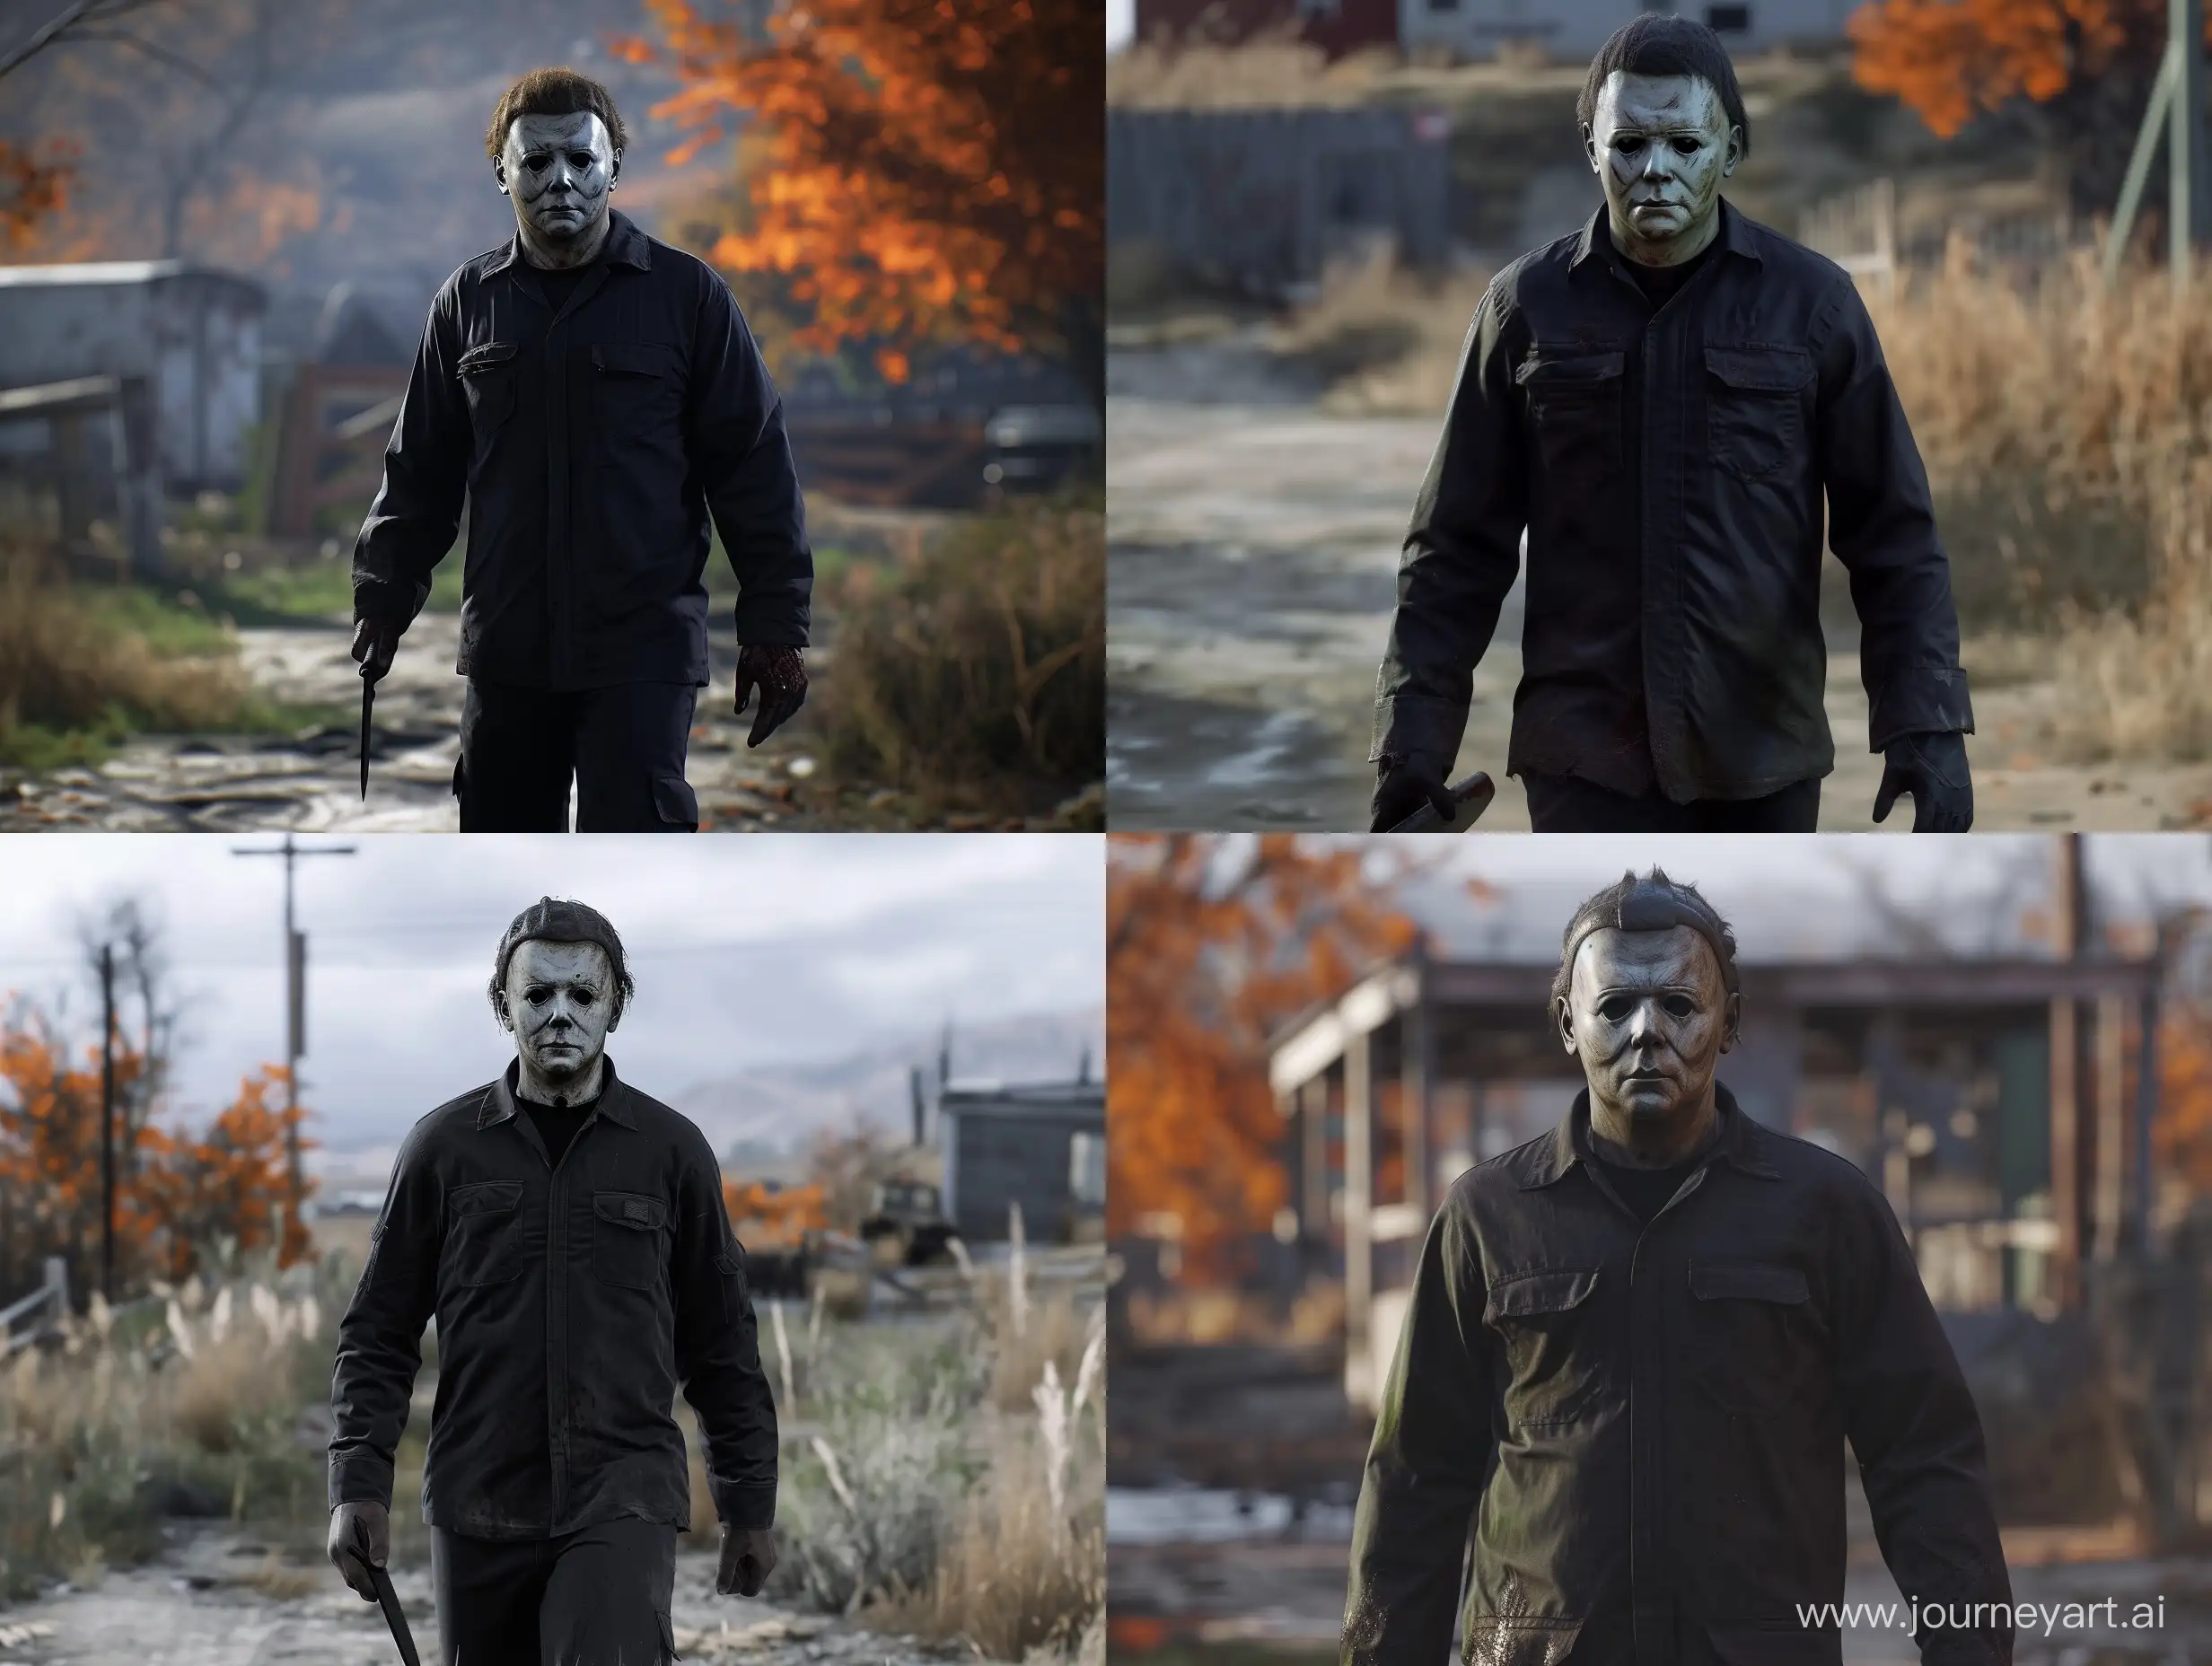 The video game " Halloween" is set in Haddonfield, Ill, and a full view third-person perspective. Specifically designed for the PS5, this version follows the main character on an expansive open-world adventure powered by the Unreal Engine 5. The game is set in a daytime setting in an open environment landscape. The main character Michael myers is seen walking through a open area, holding a knife, detailed, gore, horror,
